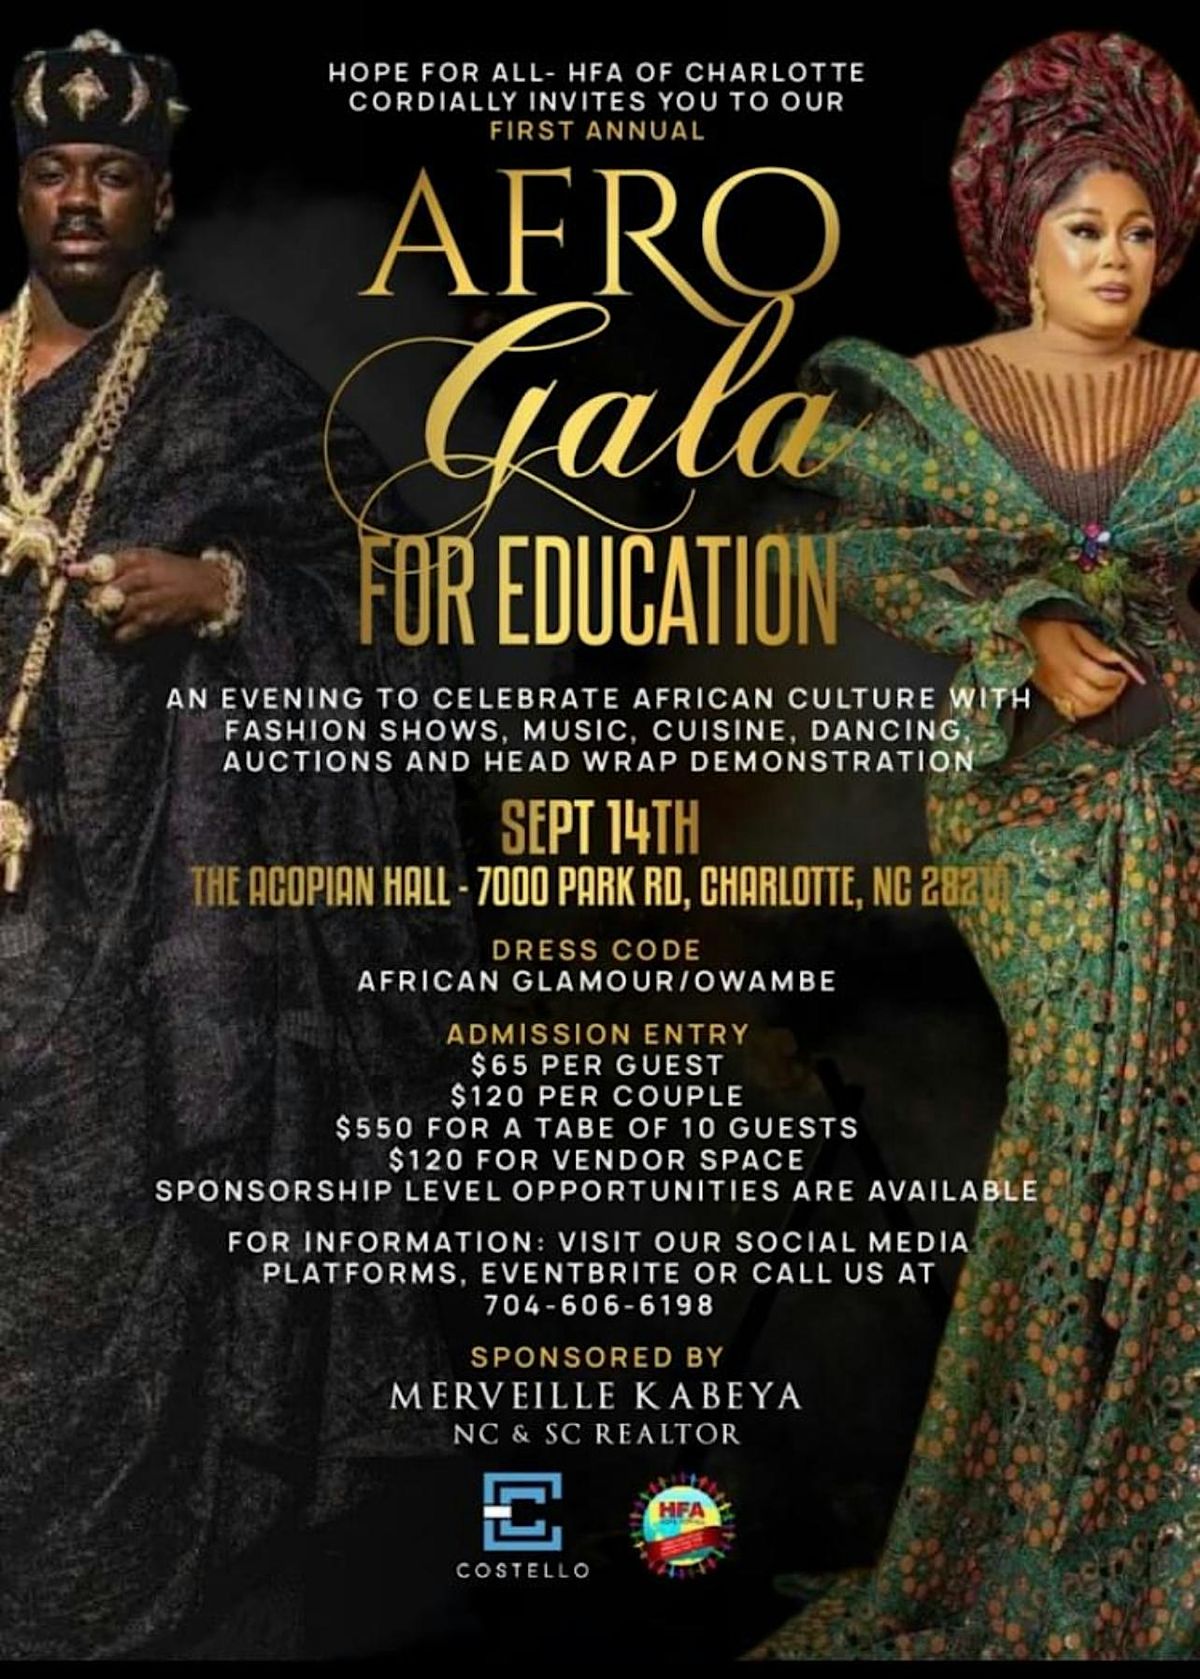 Hope for All-HFA of Charlotte's Afro Gala for Education